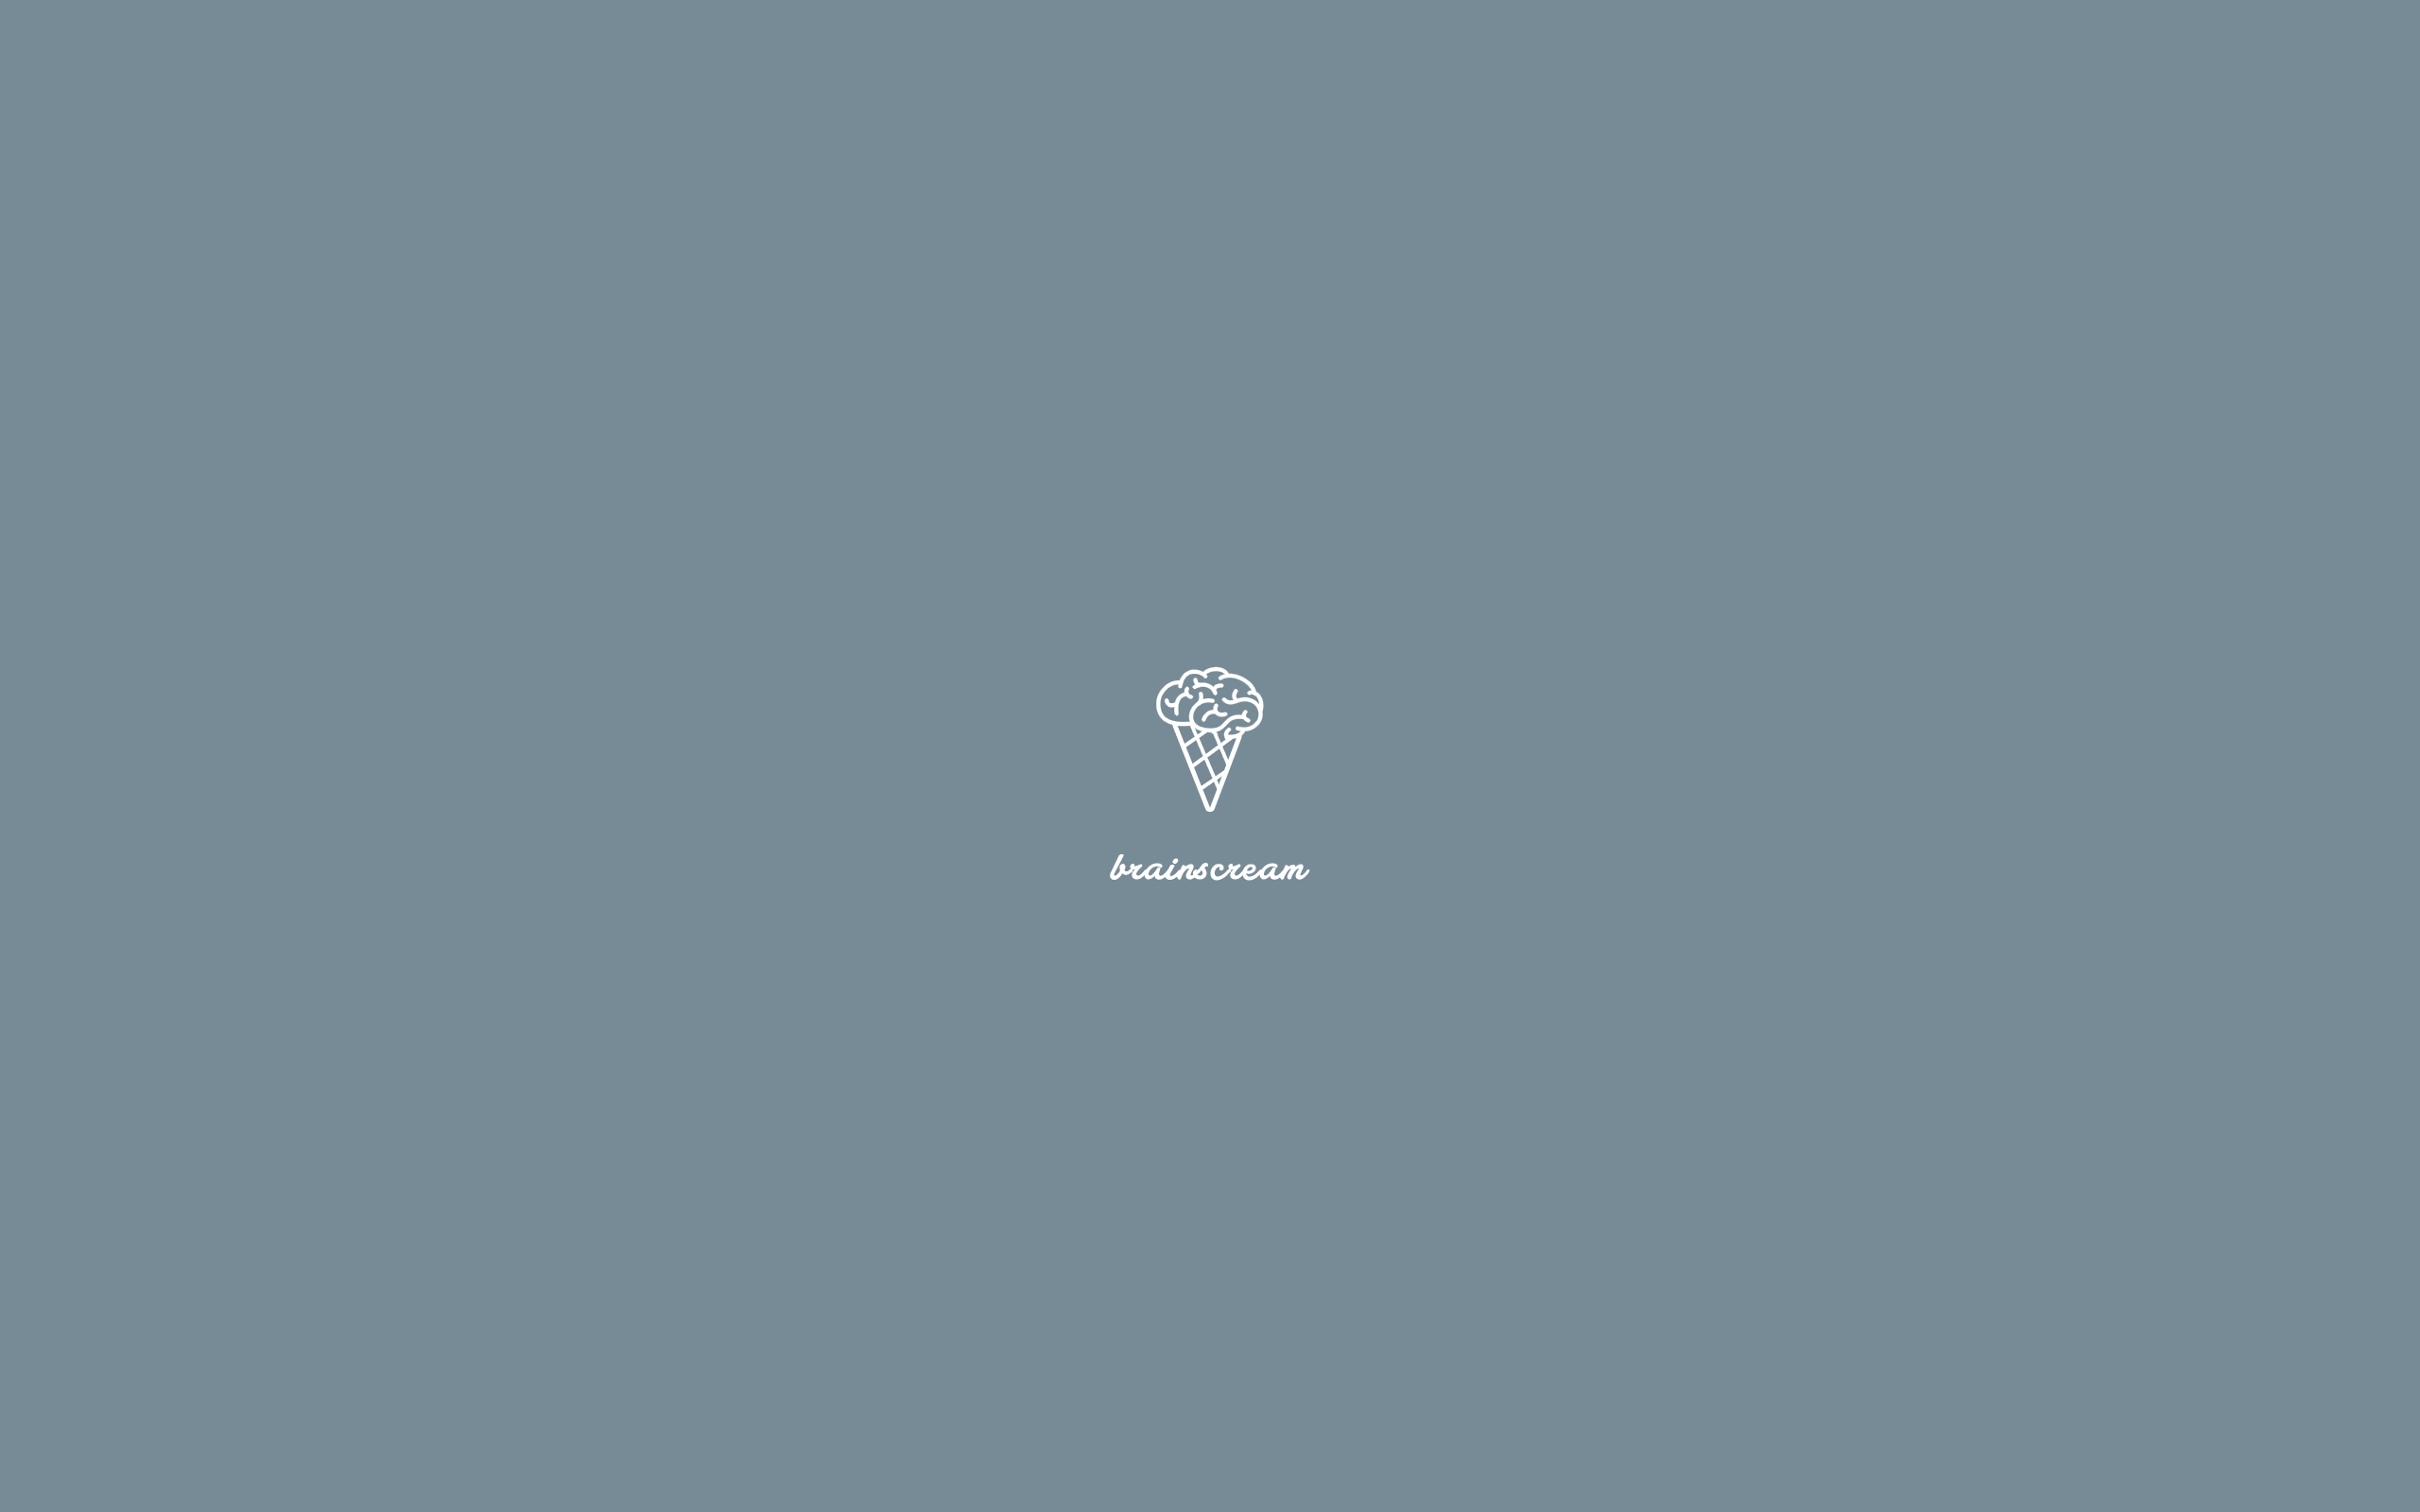 A simple ice cream cone on the wall - Minimalist